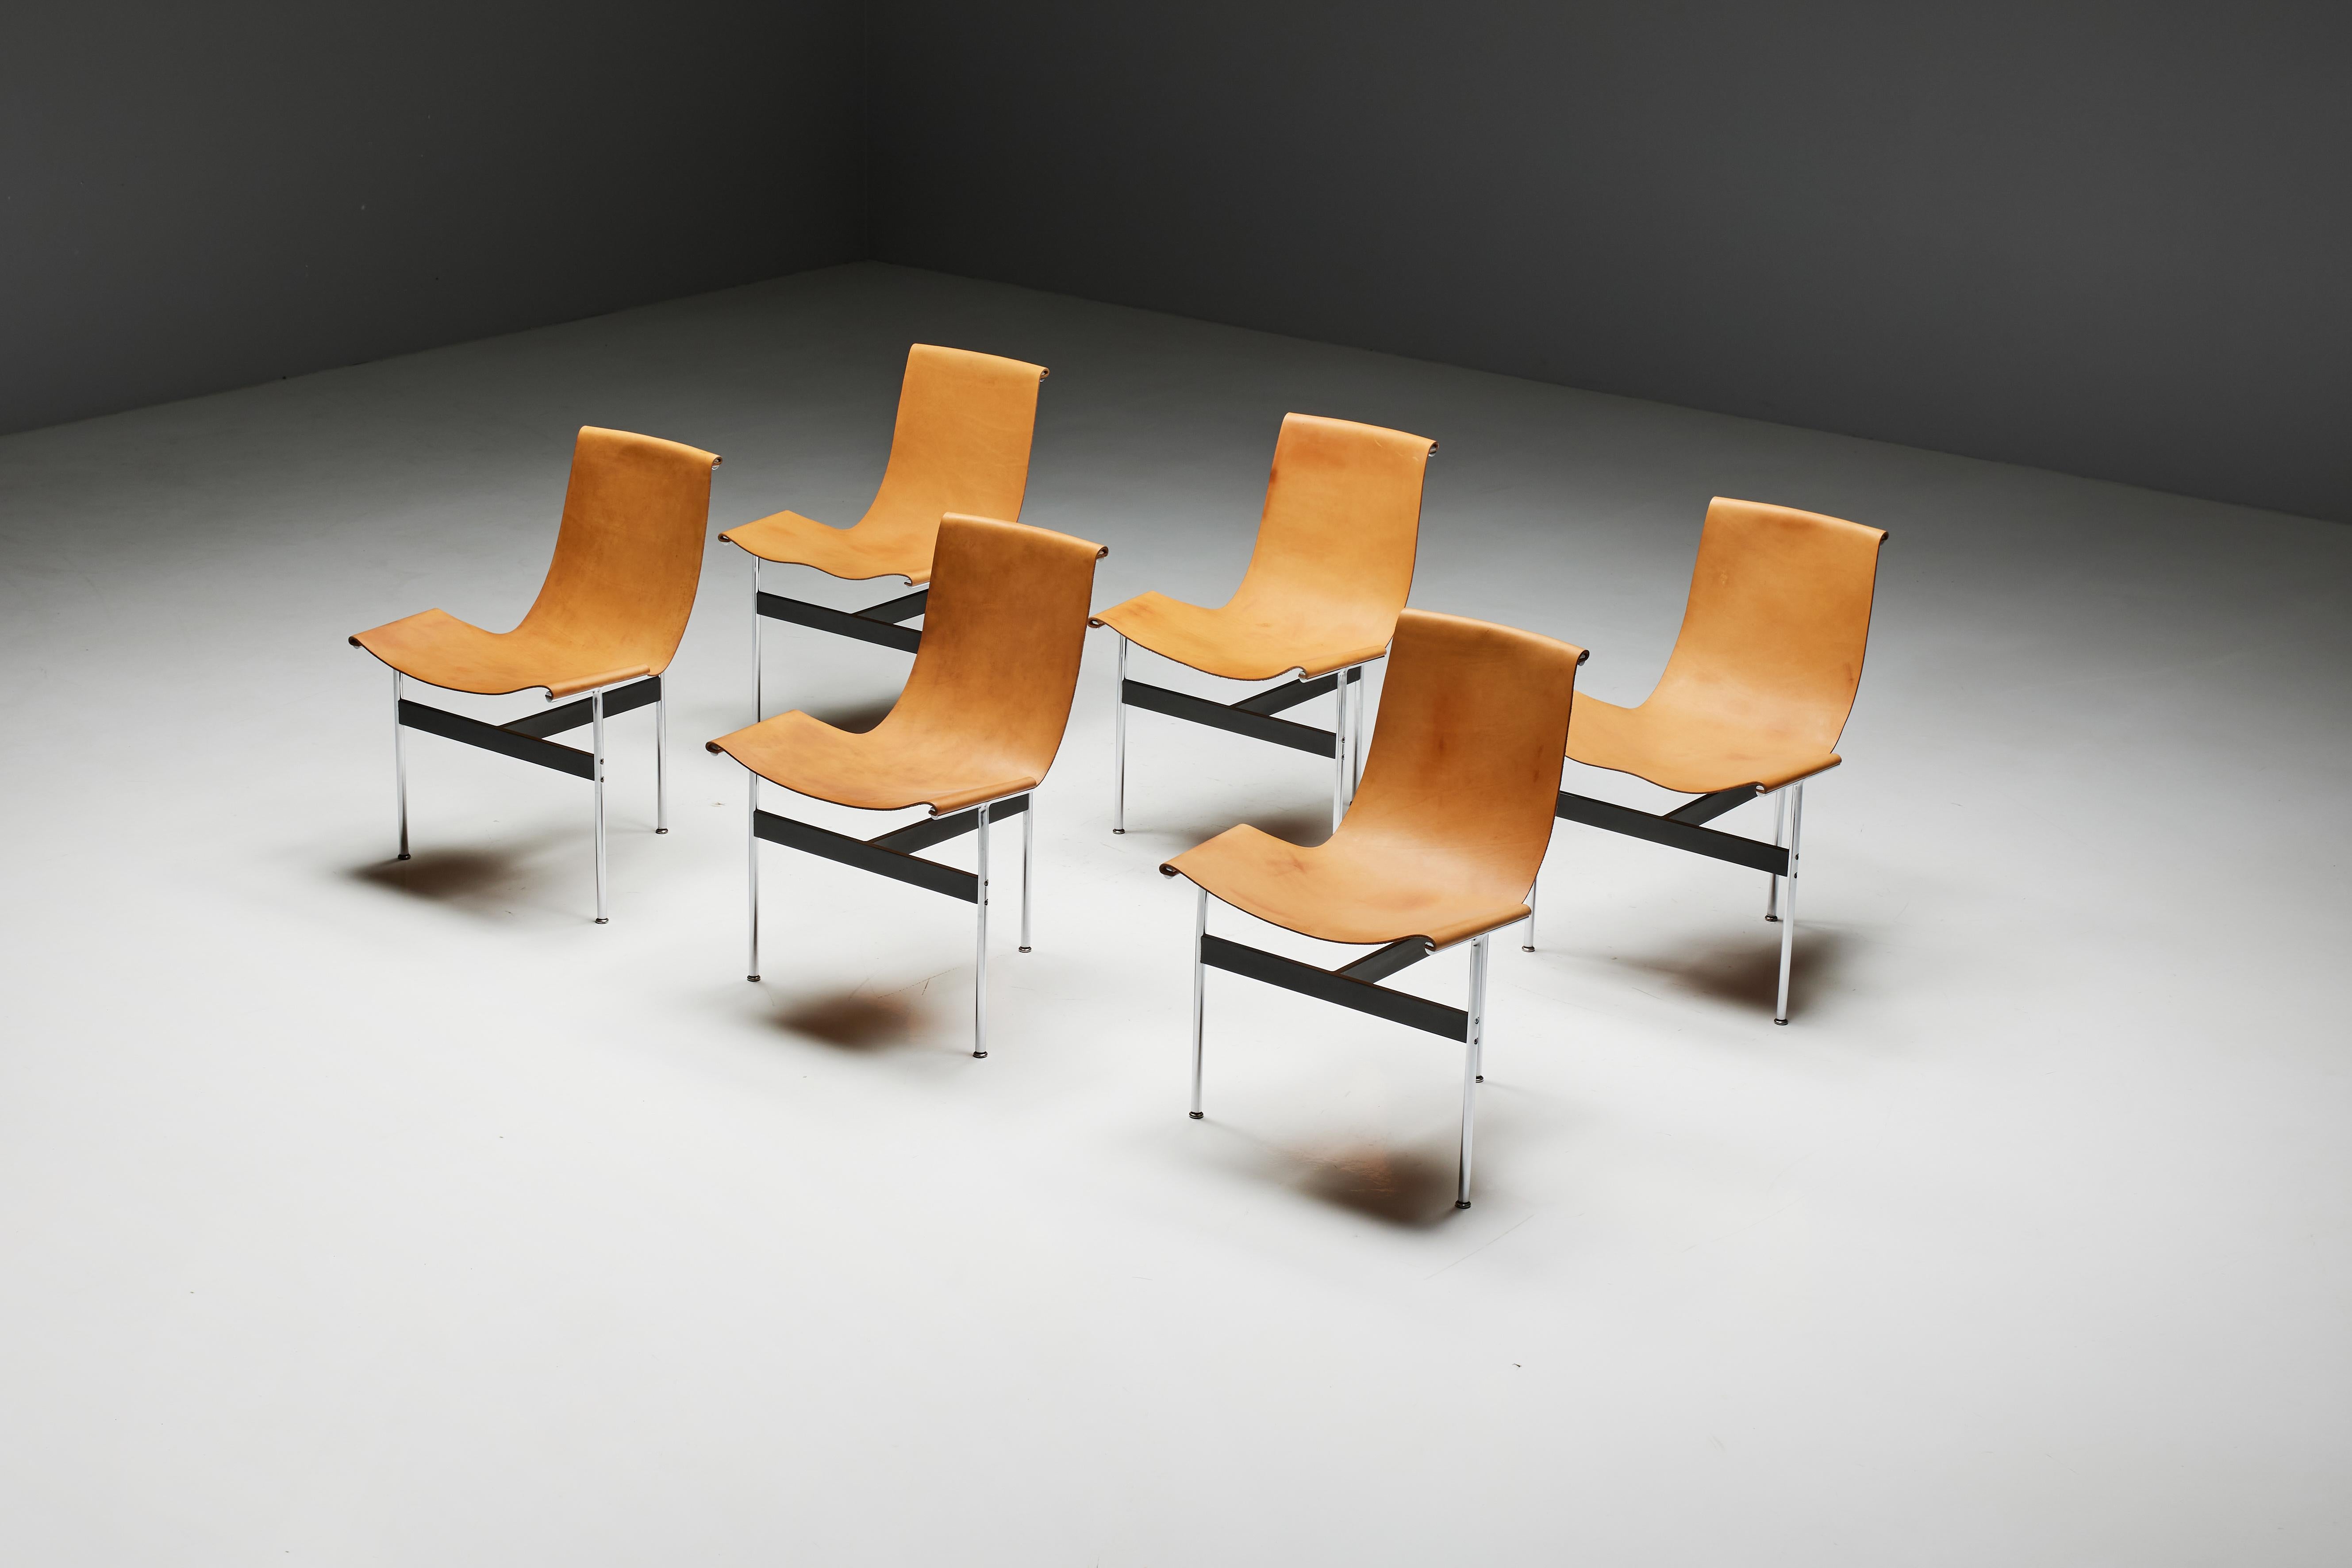 T-chairs by American trio of designers Katavolos, Kelley, and Littell in 1952 as part of the 